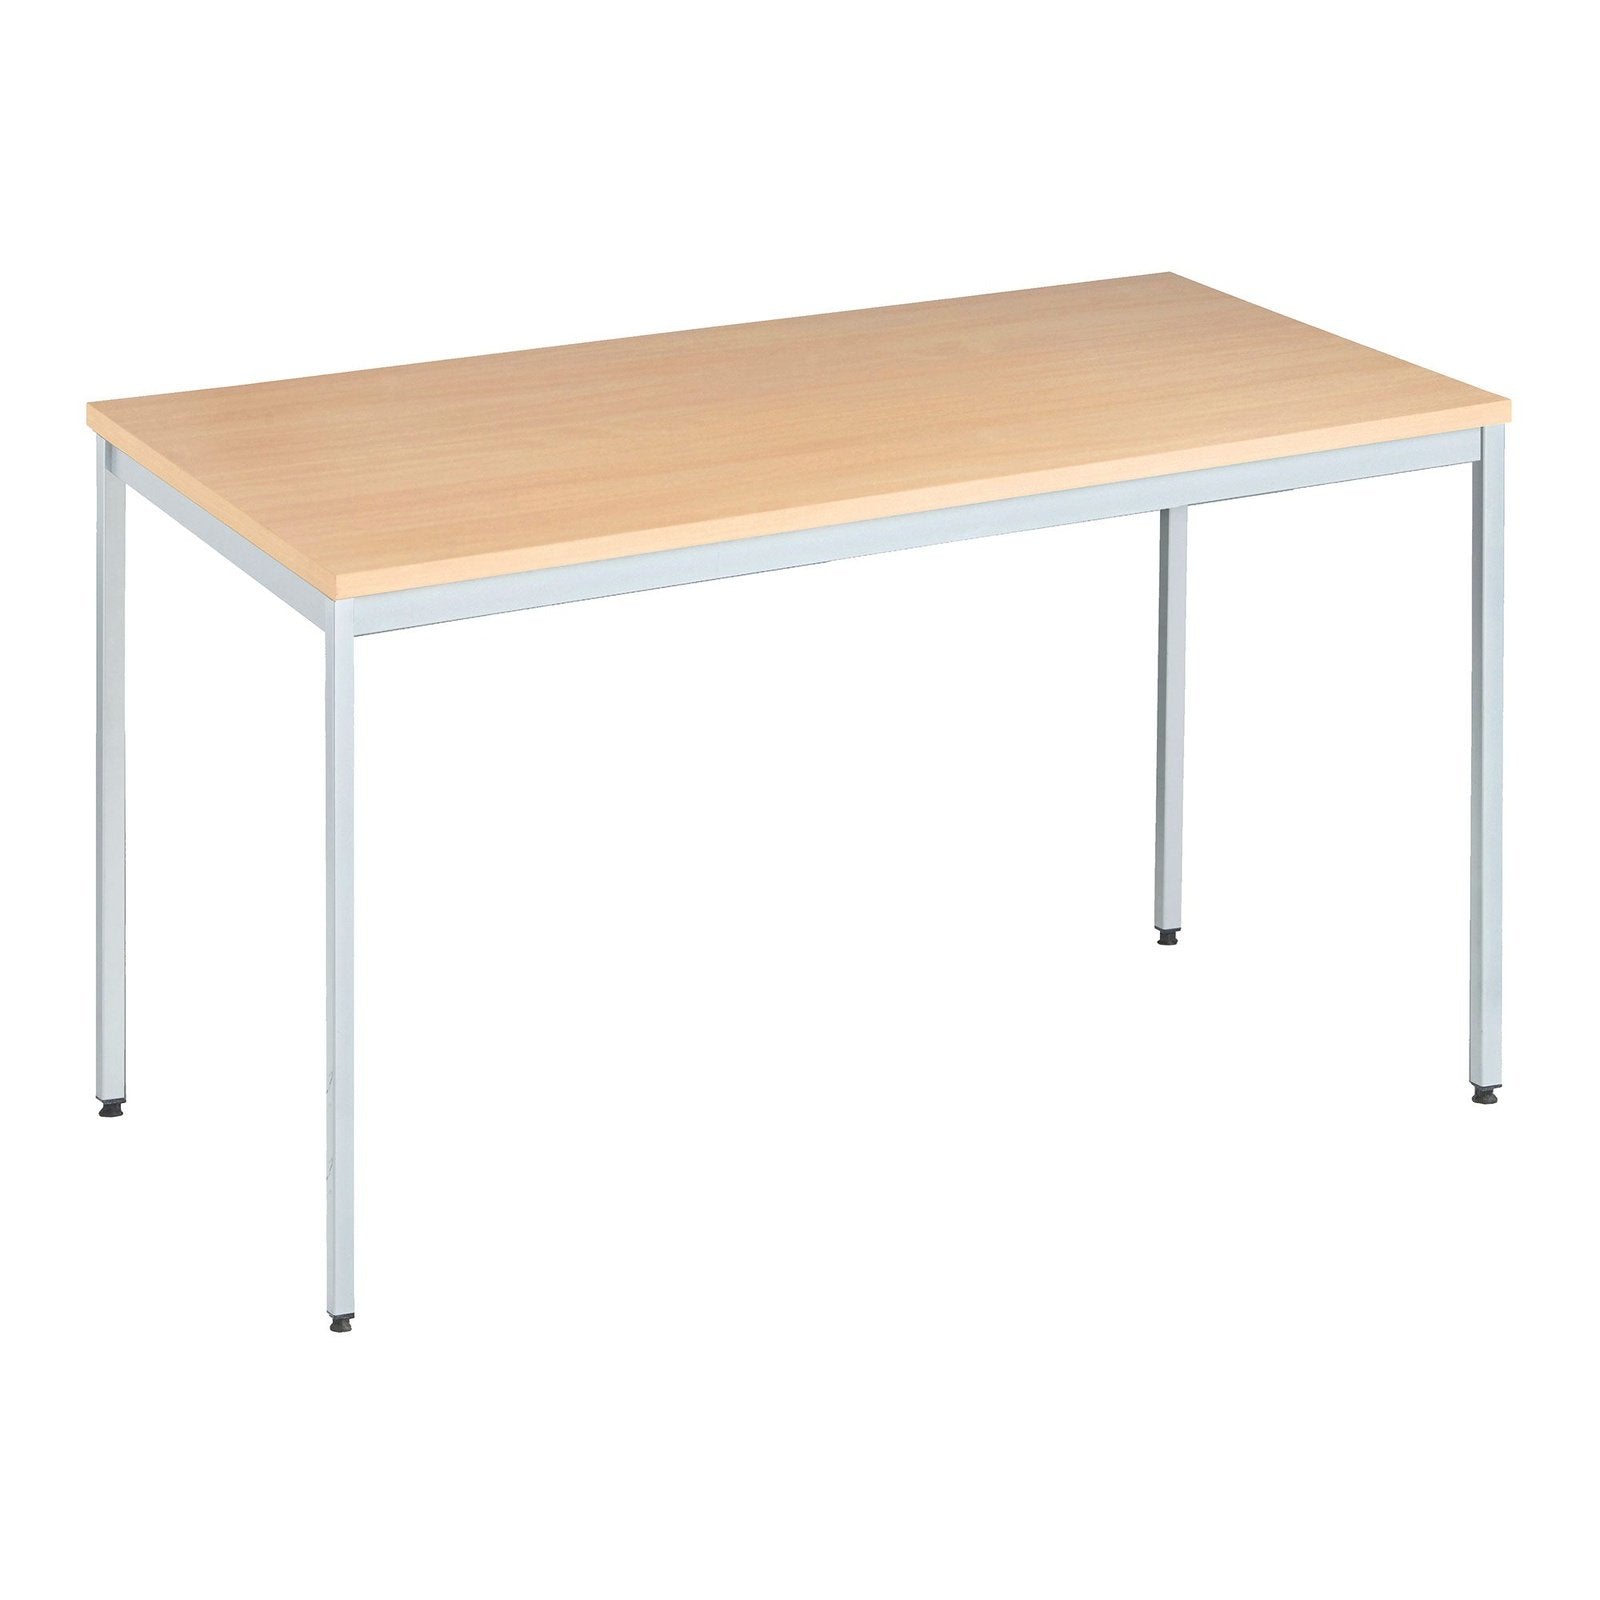 Rectangular Table - 1400x800mm - Office Products Online